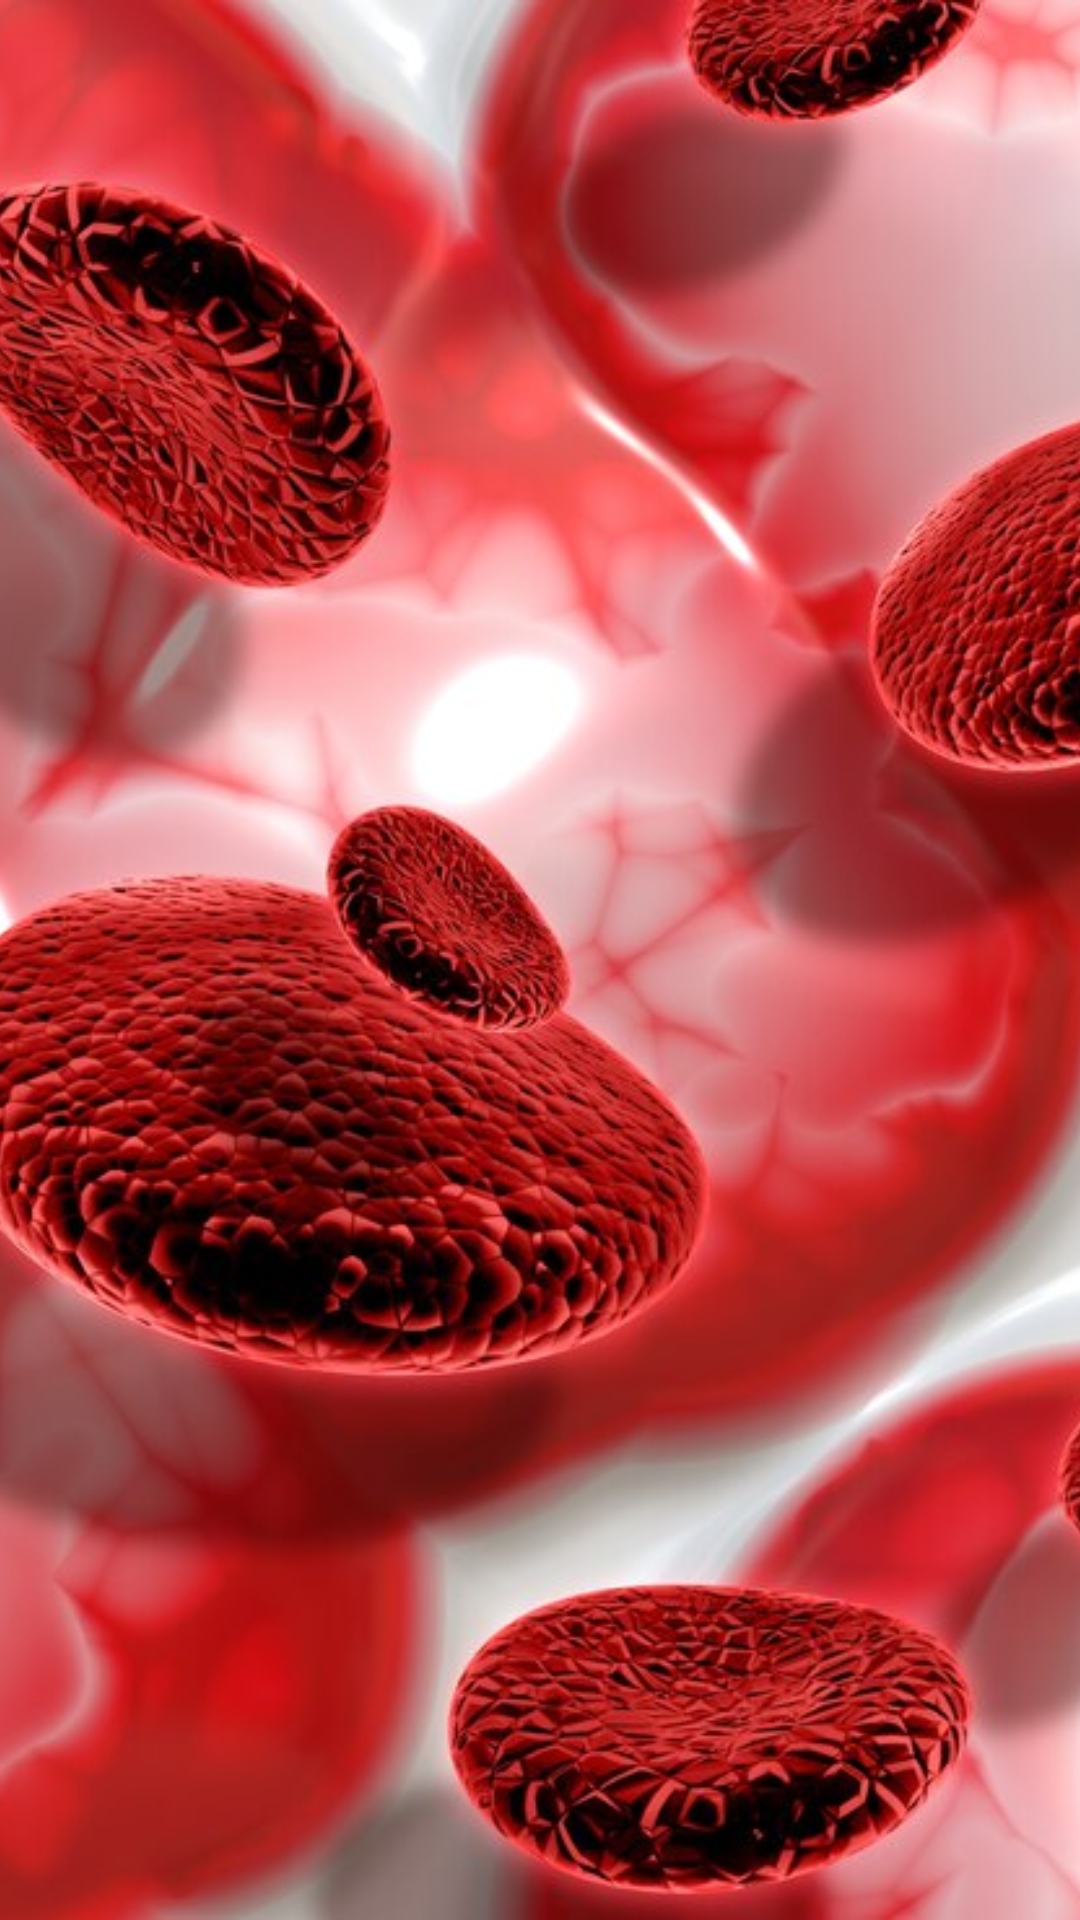 10 superfoods that help increase platelet count